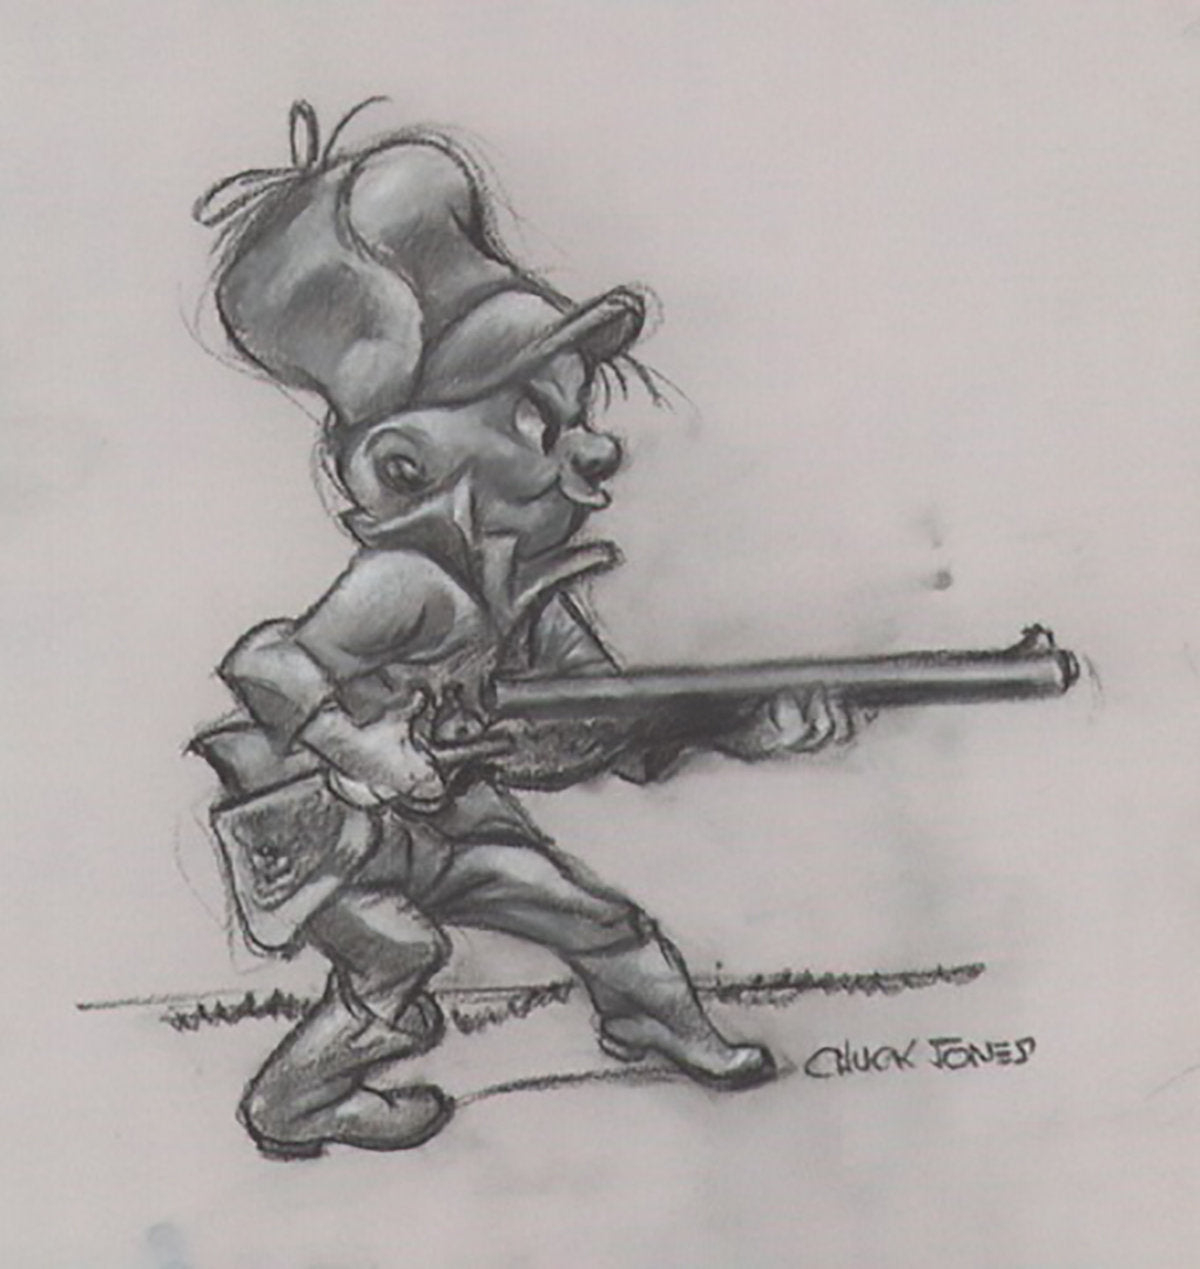 Chuck Jones Elmer Fudd Warner Brothers Giclee Limited Edition of 120 on Paper from the Character Portfolio Series